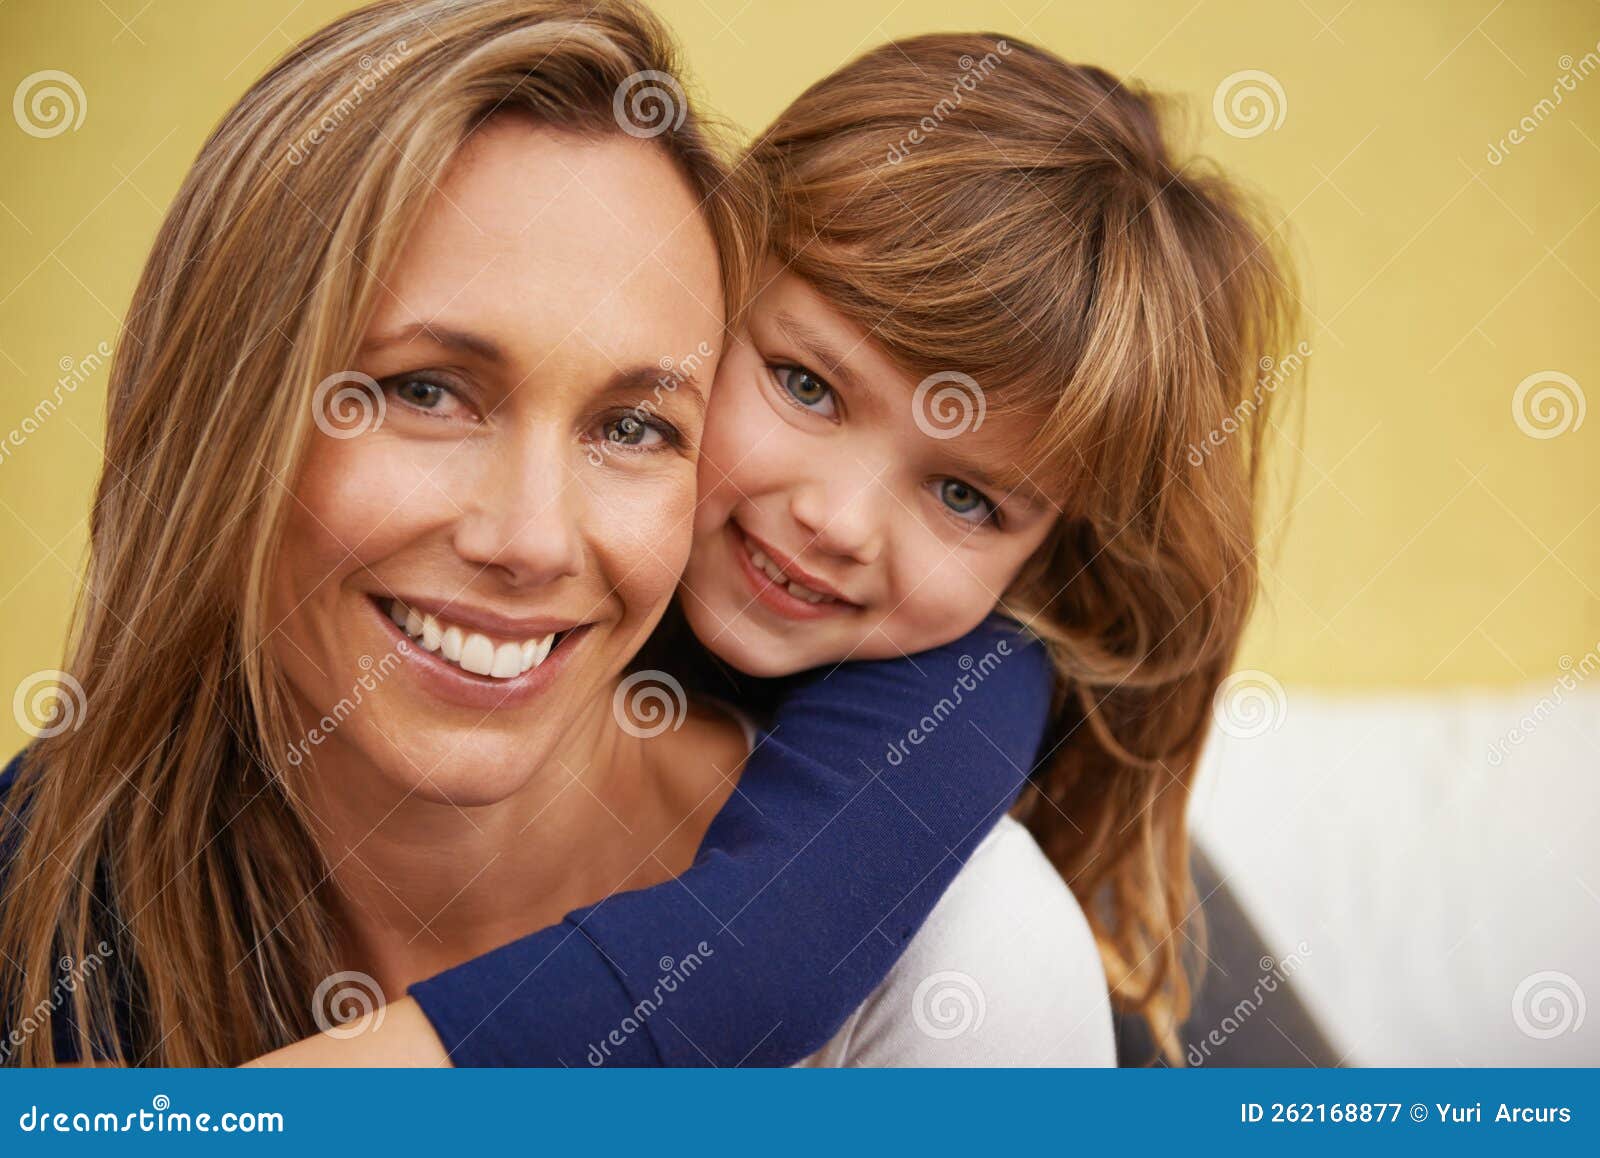 She Loves Her Mommy So Much Portrait Of A Loving Mother And Daughter At Home Stock Image